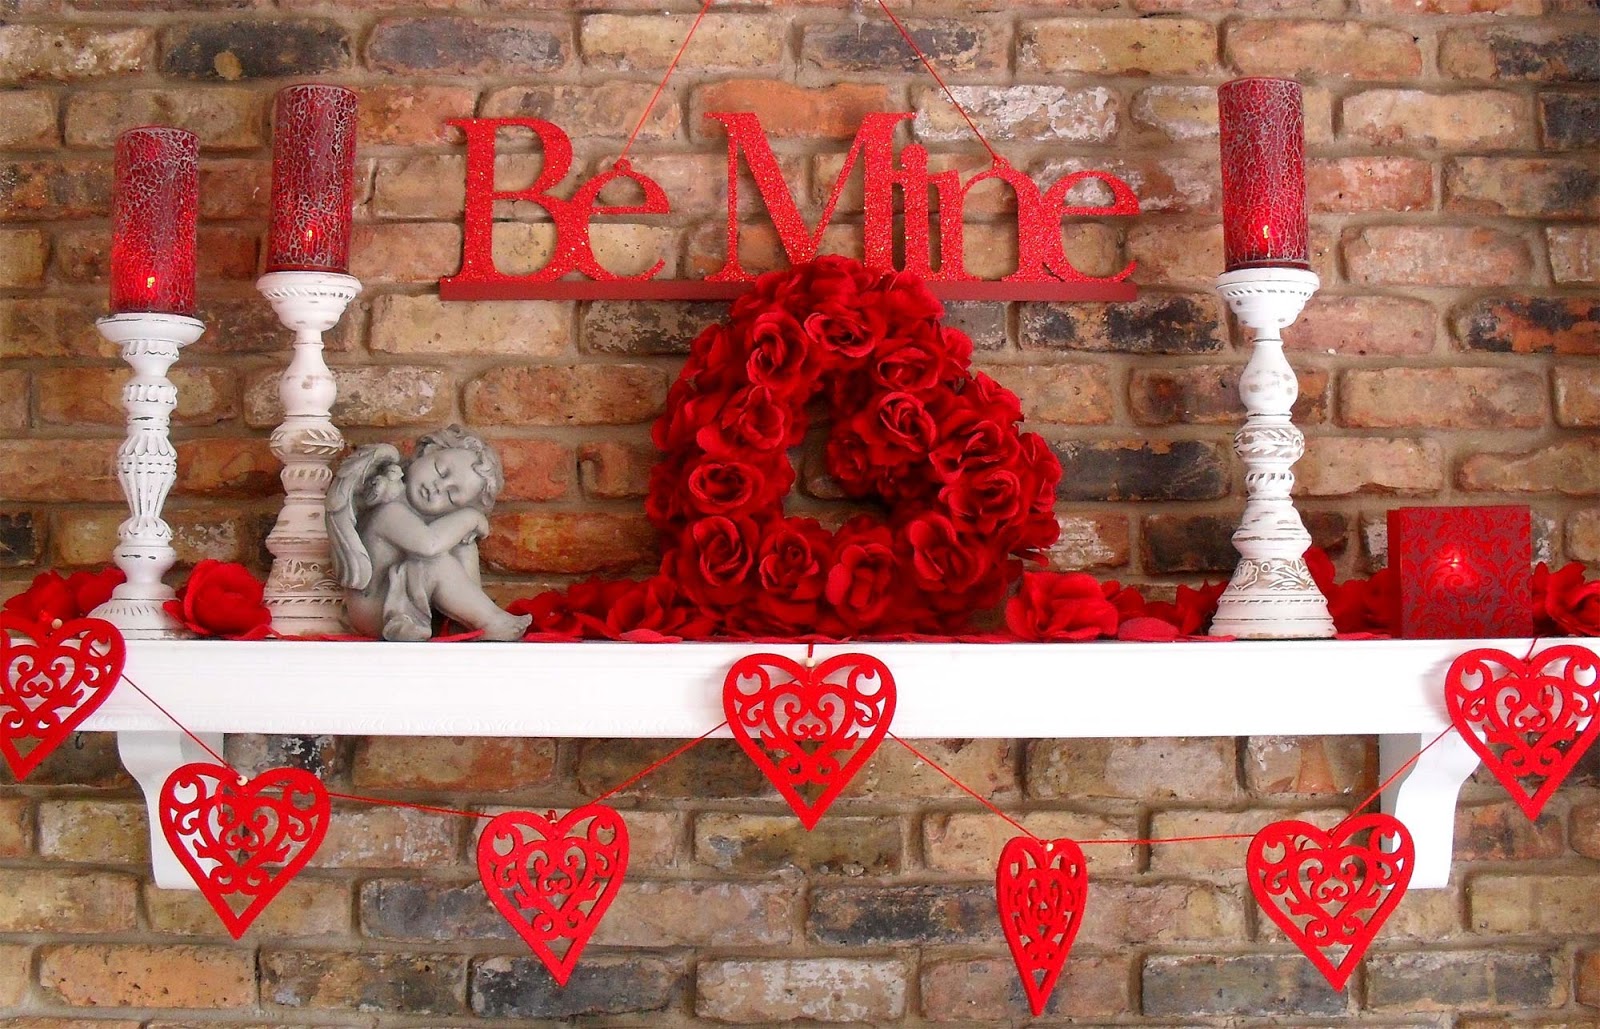 valentine's day decorations ideas 2016 to decorate bedroom,office and House